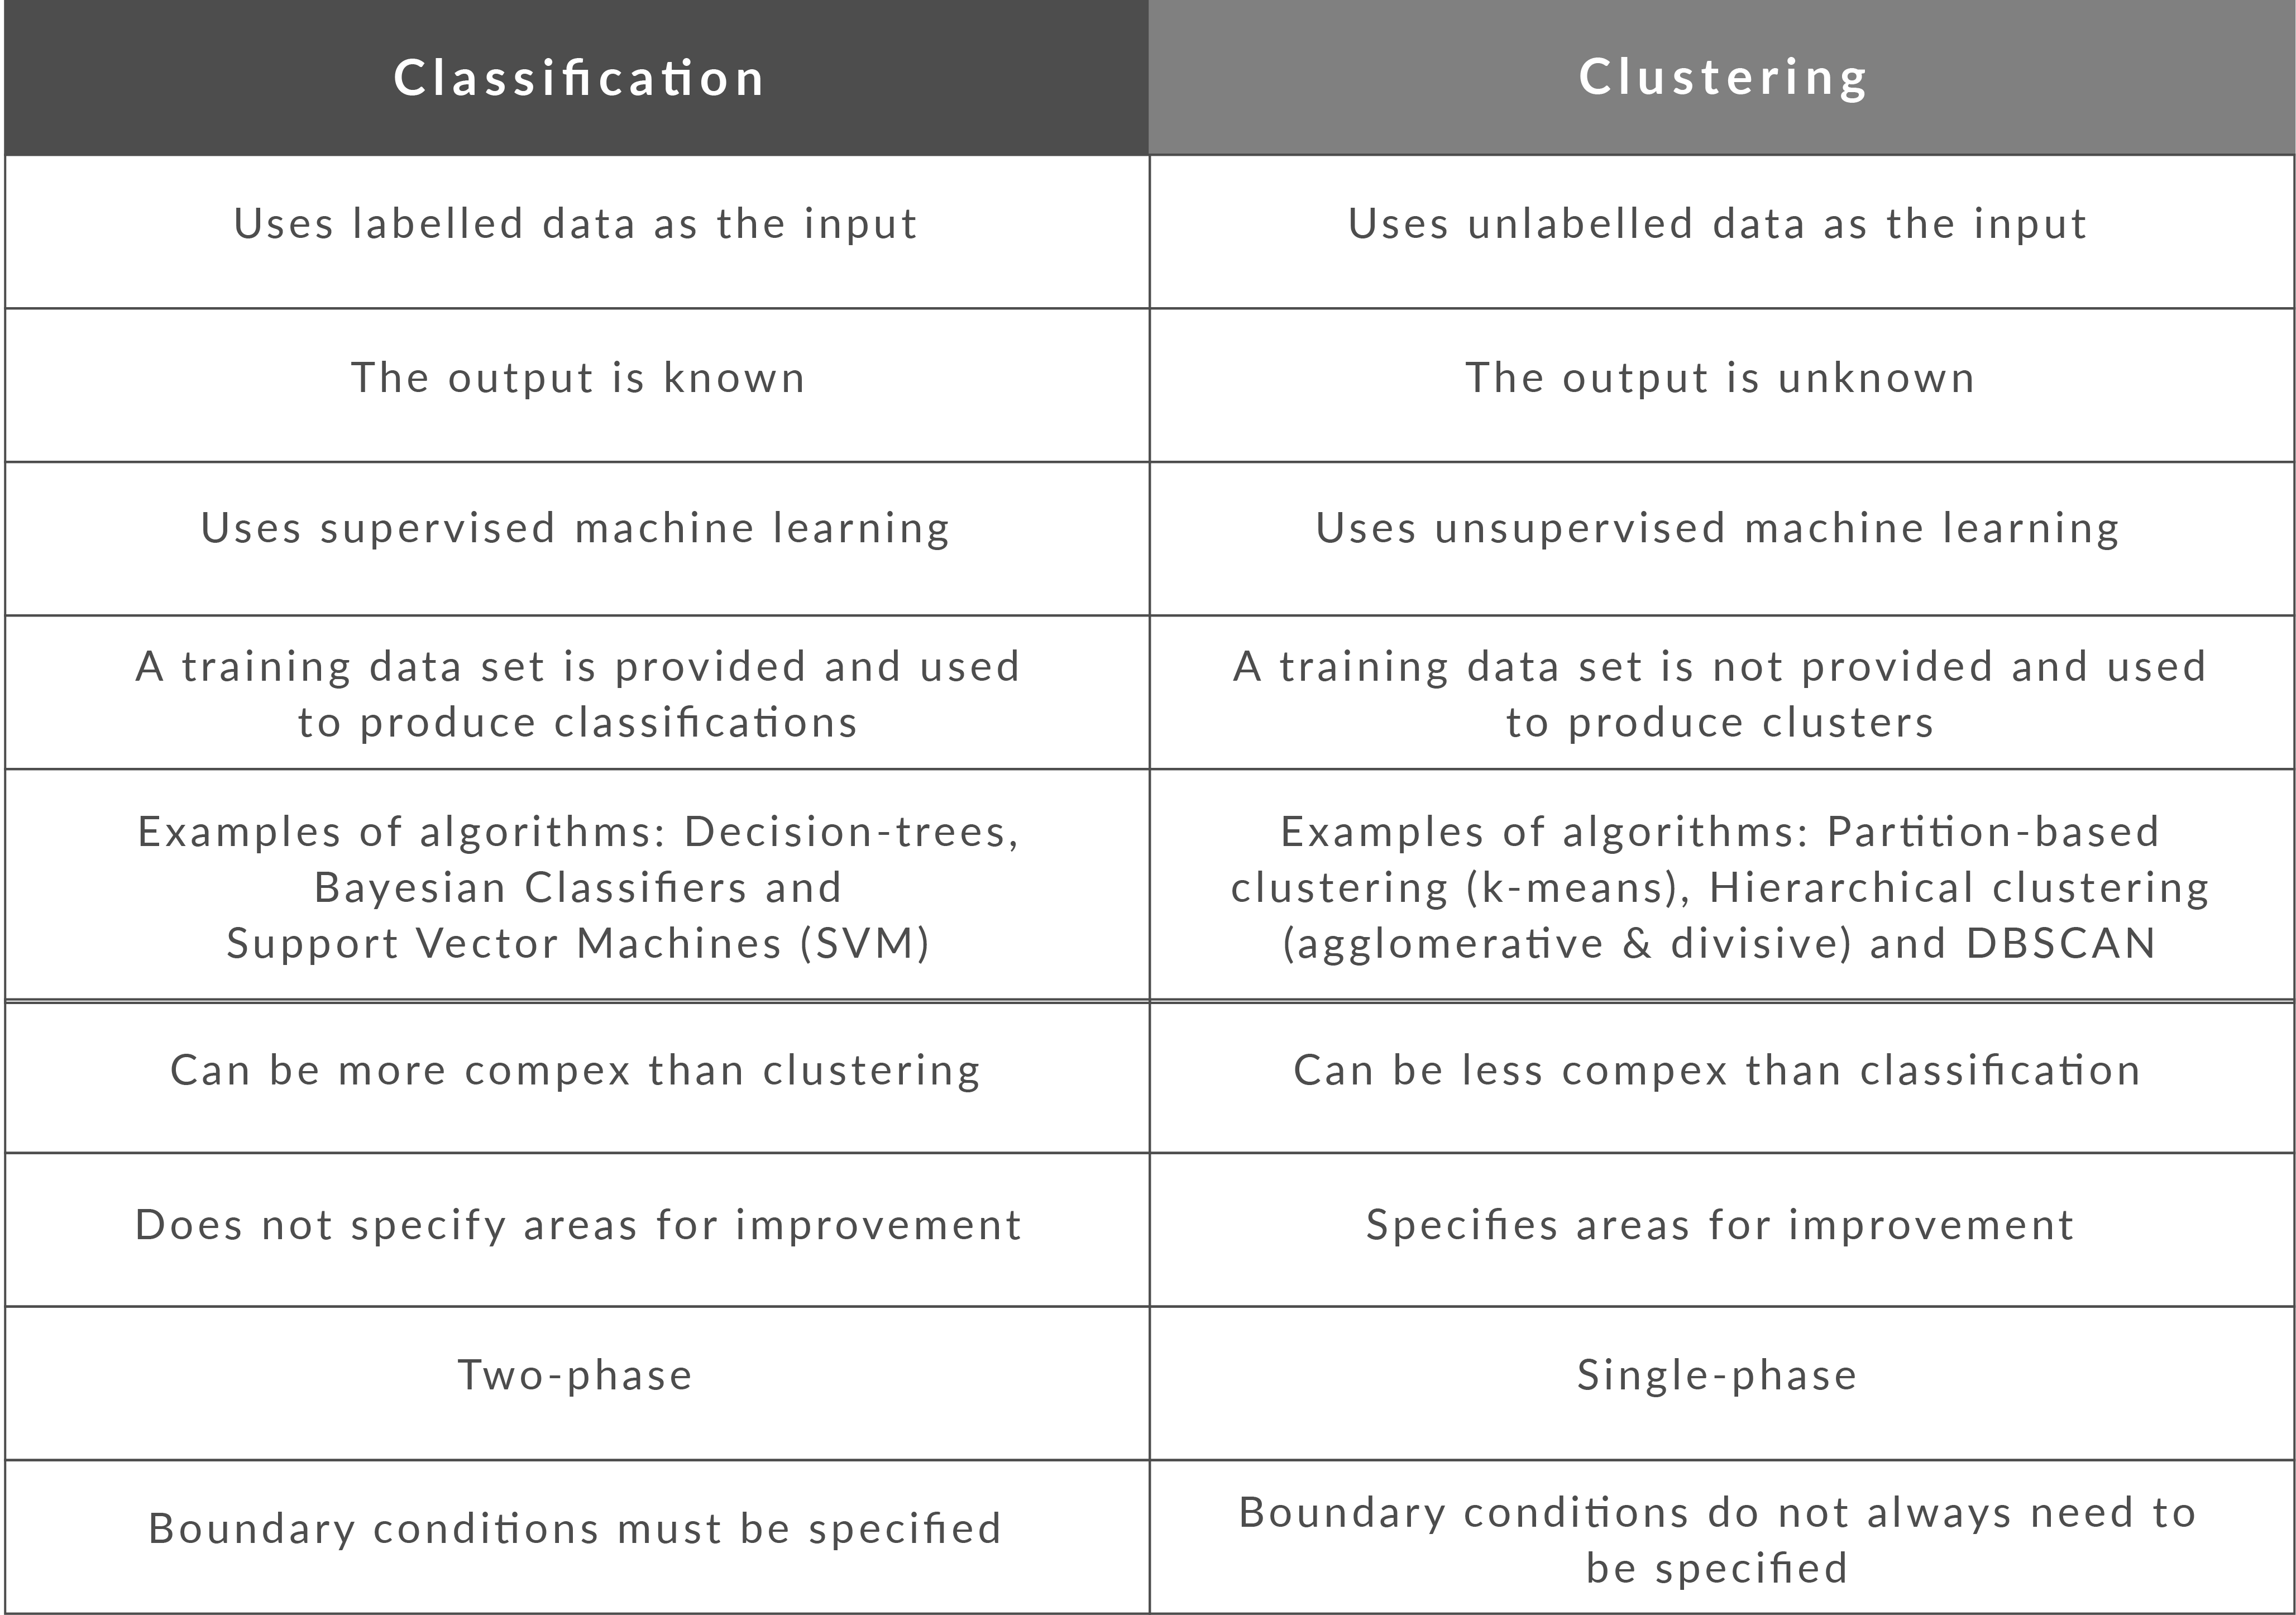 What is one difference between clustering and classification?